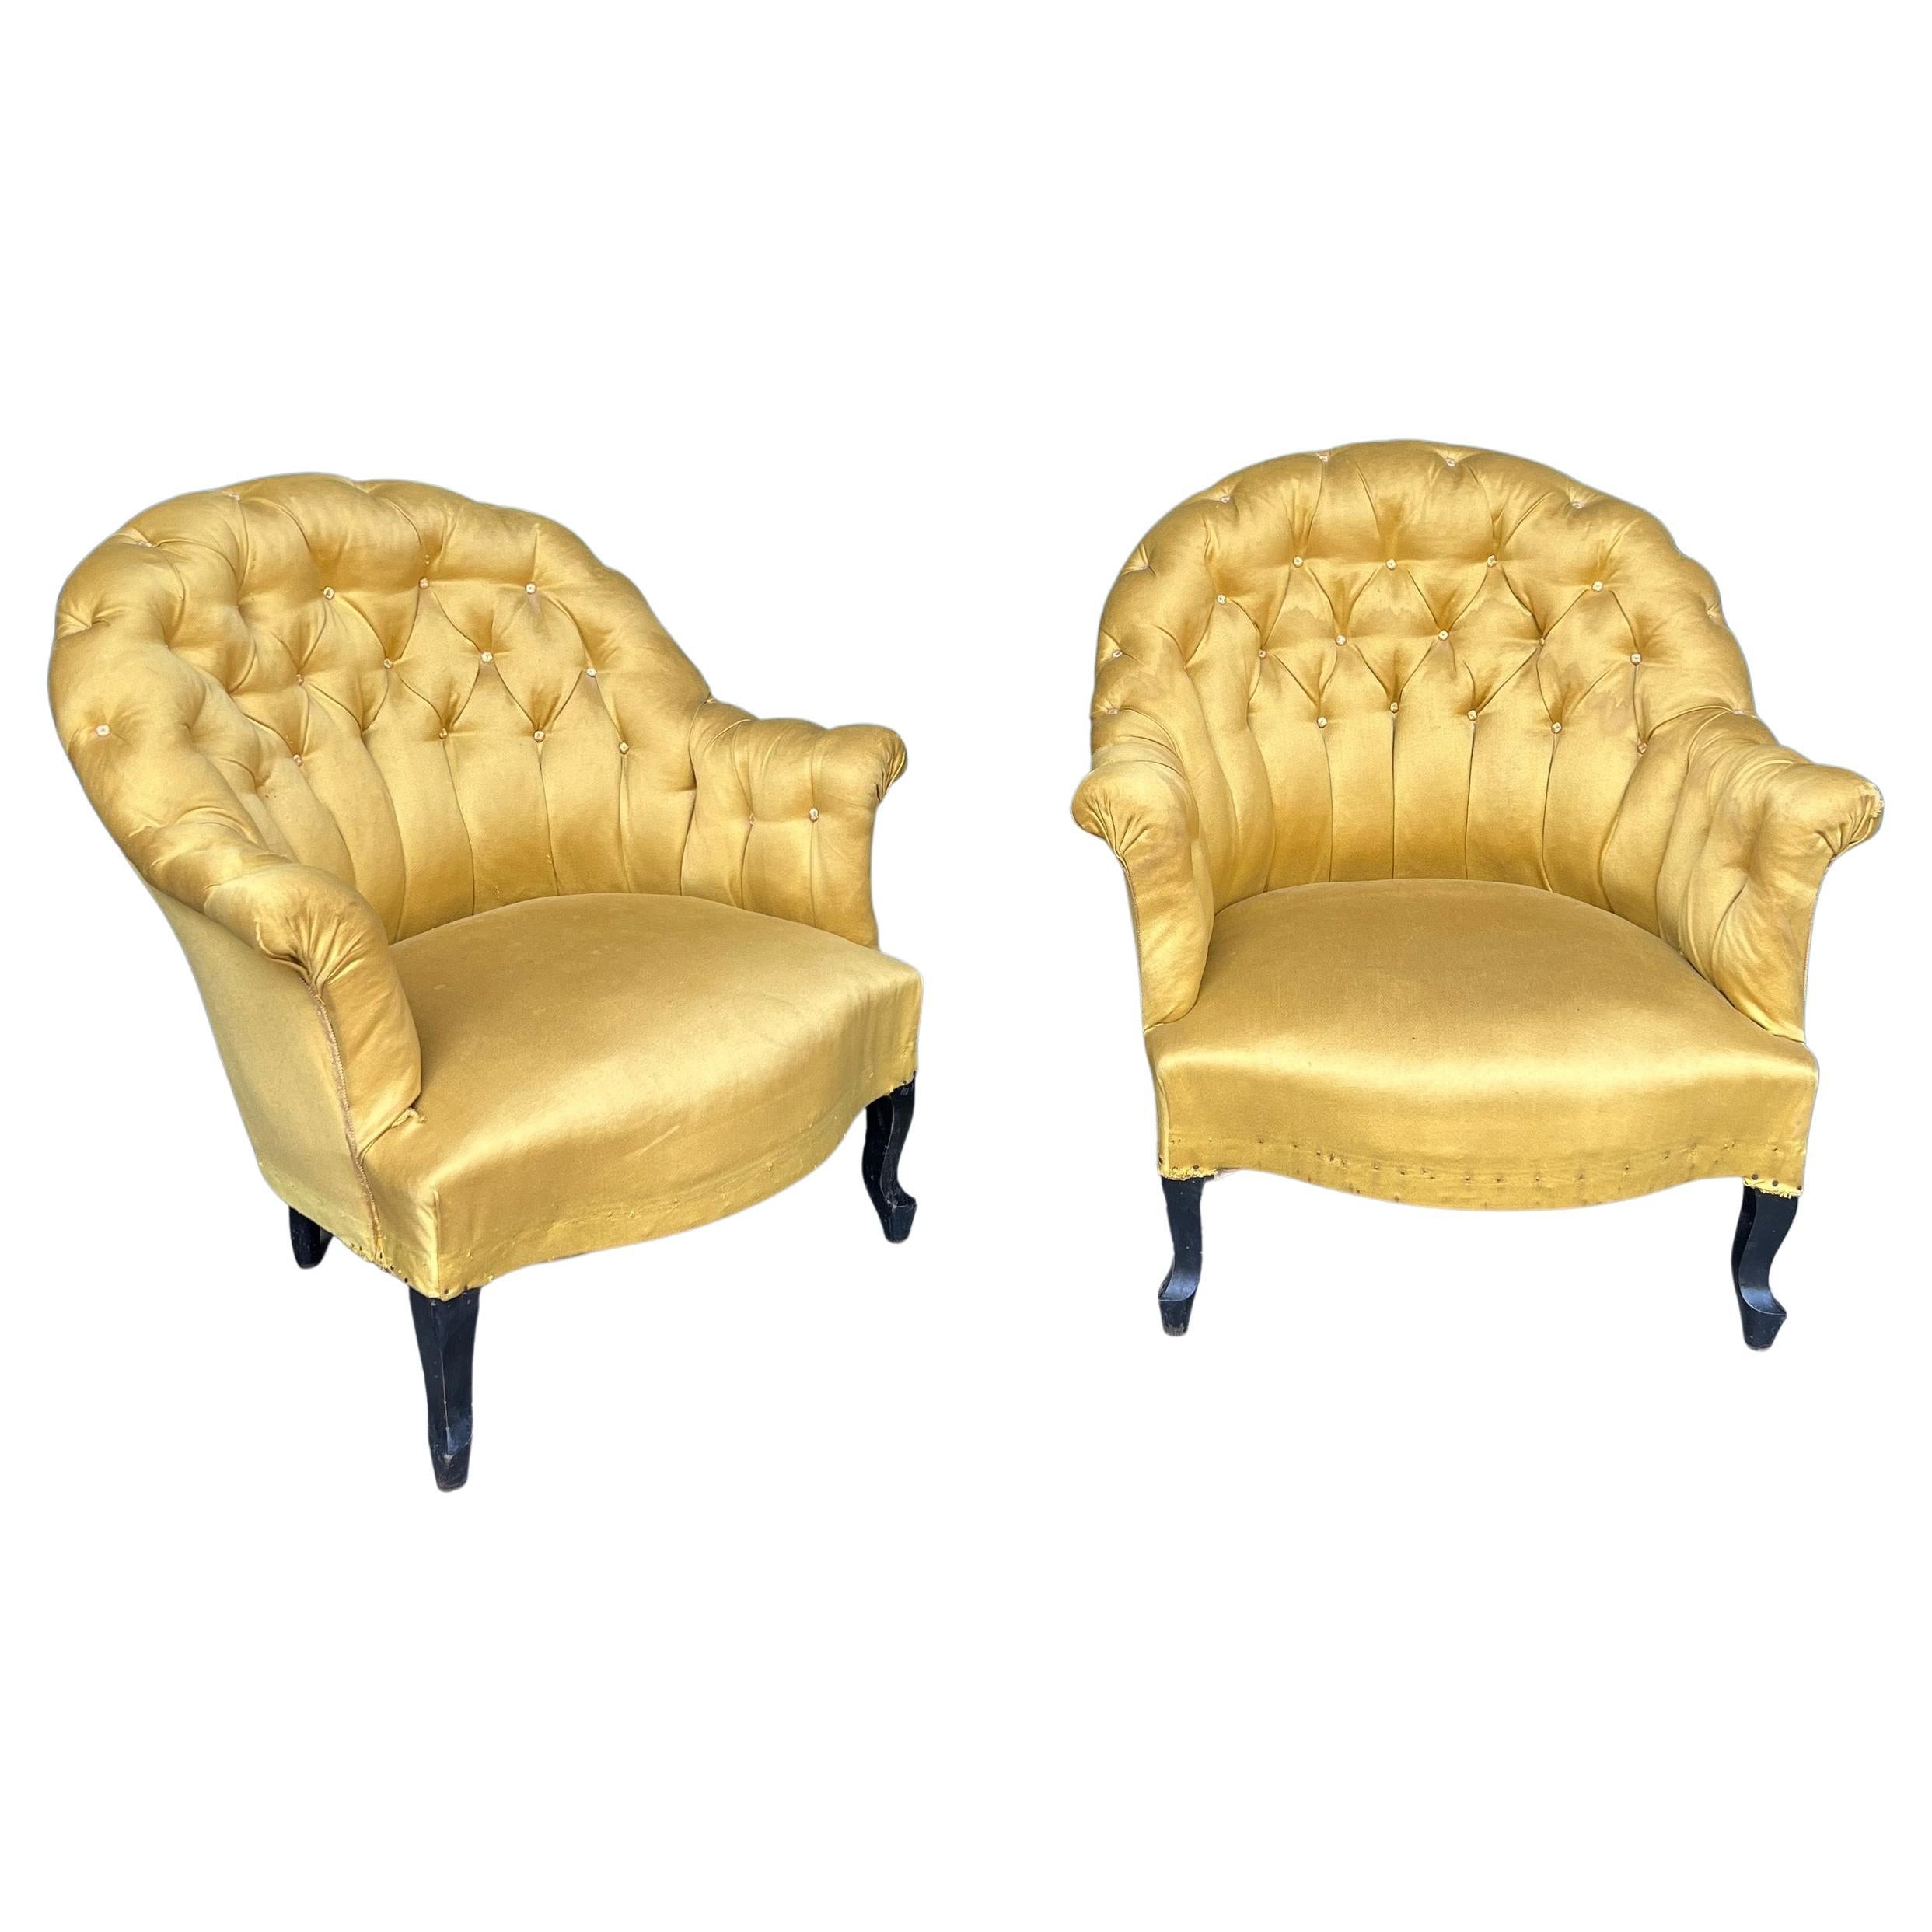 Pair of French Napoleon III Tufted Arm Chairs in Gold Fabric